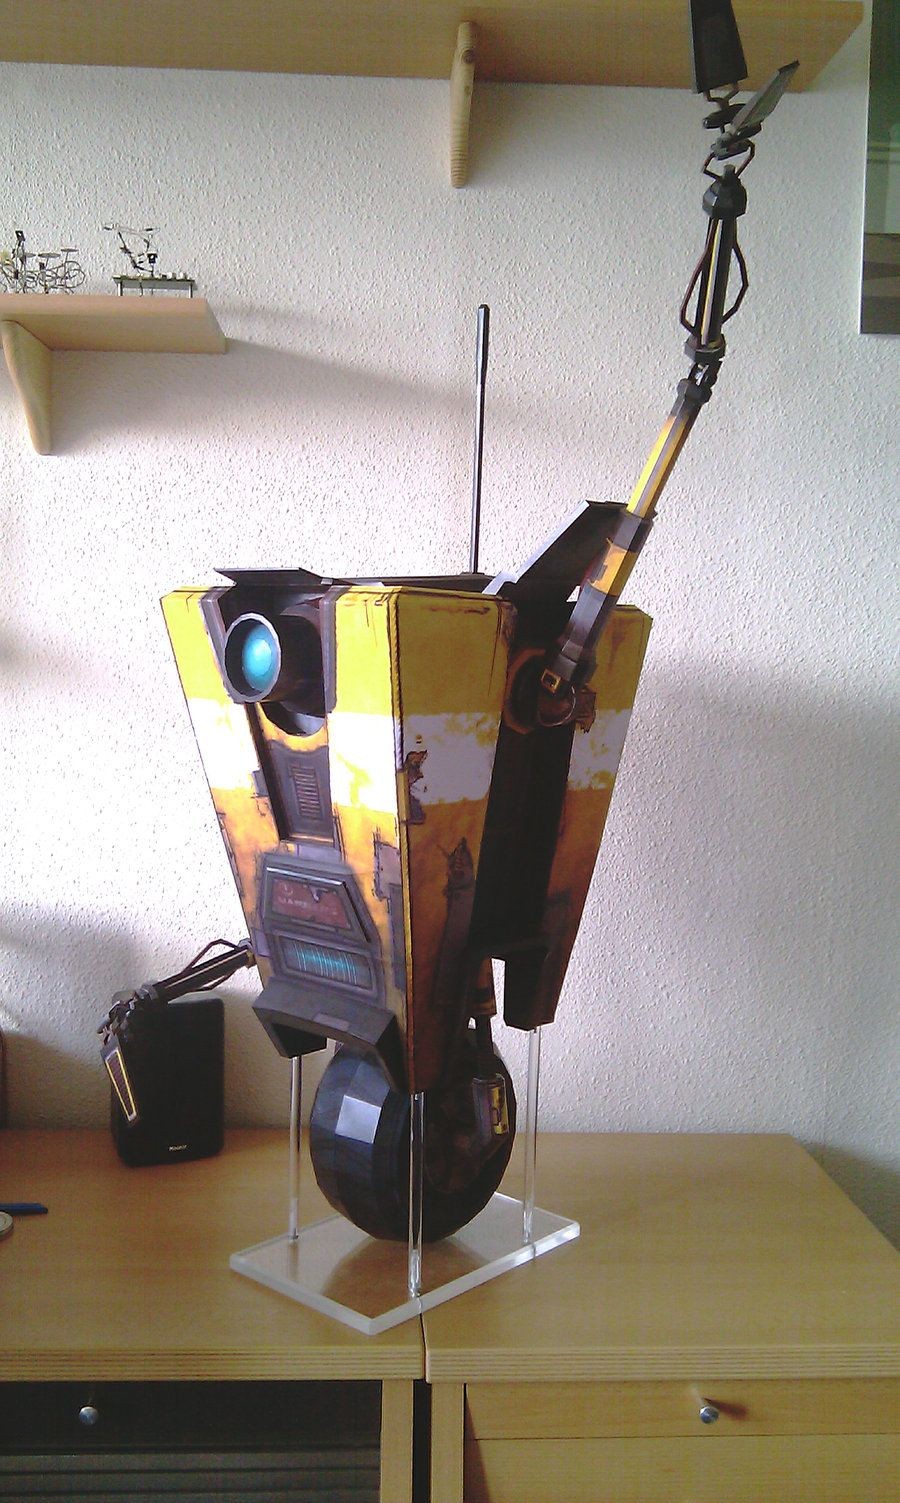 Claptrap Papercraft Claptrap Model Coolest Thing Ever I Wish I Had One Especially if